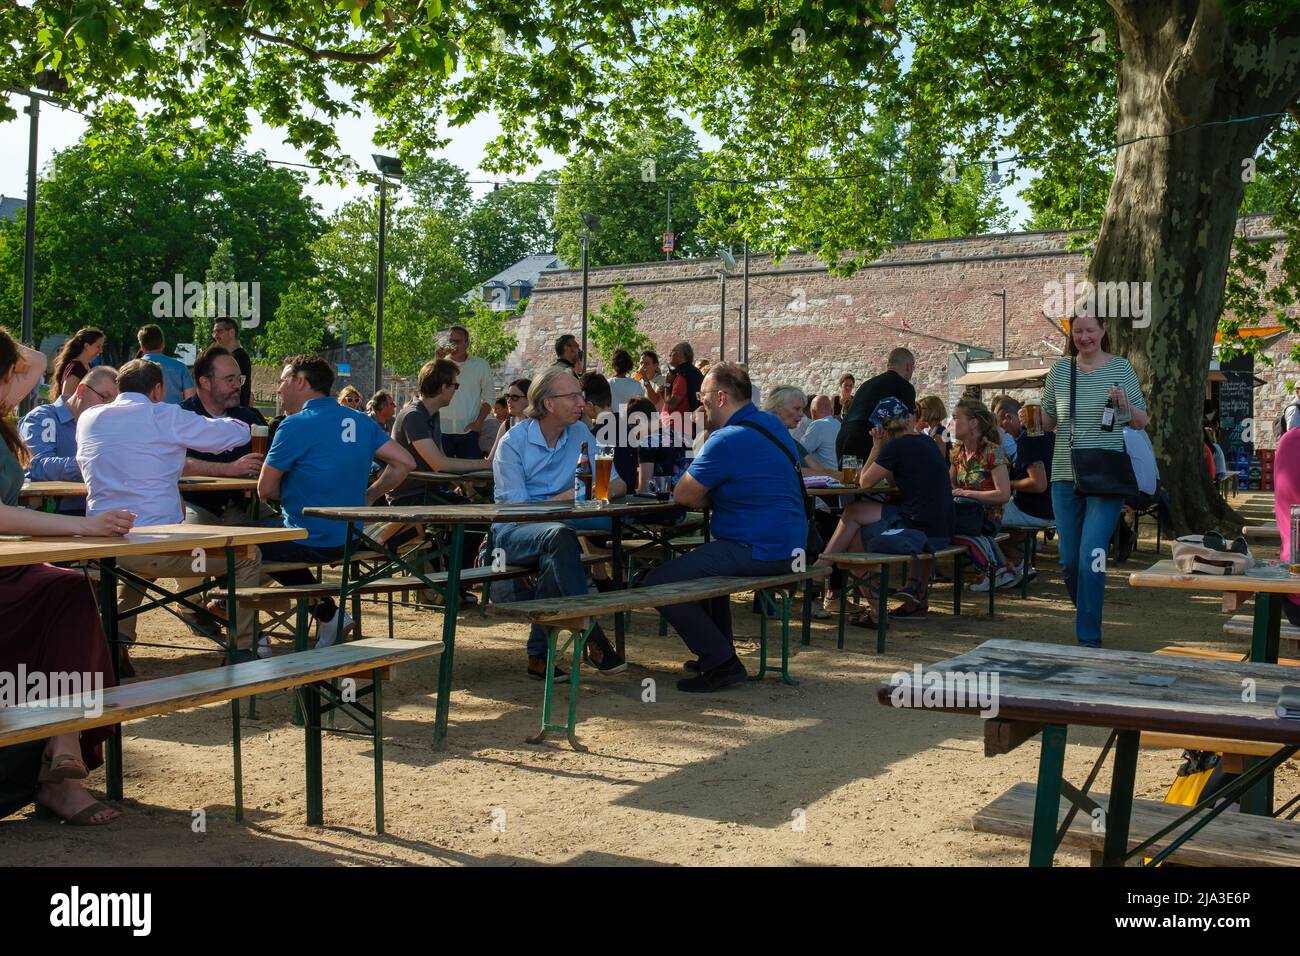 Bonn, Germany - May 18, 2022 : People enjoying cold beers and other beverages at a cozy outdoor terrace called Alter Zoll, next to the river Rhine Stock Photo